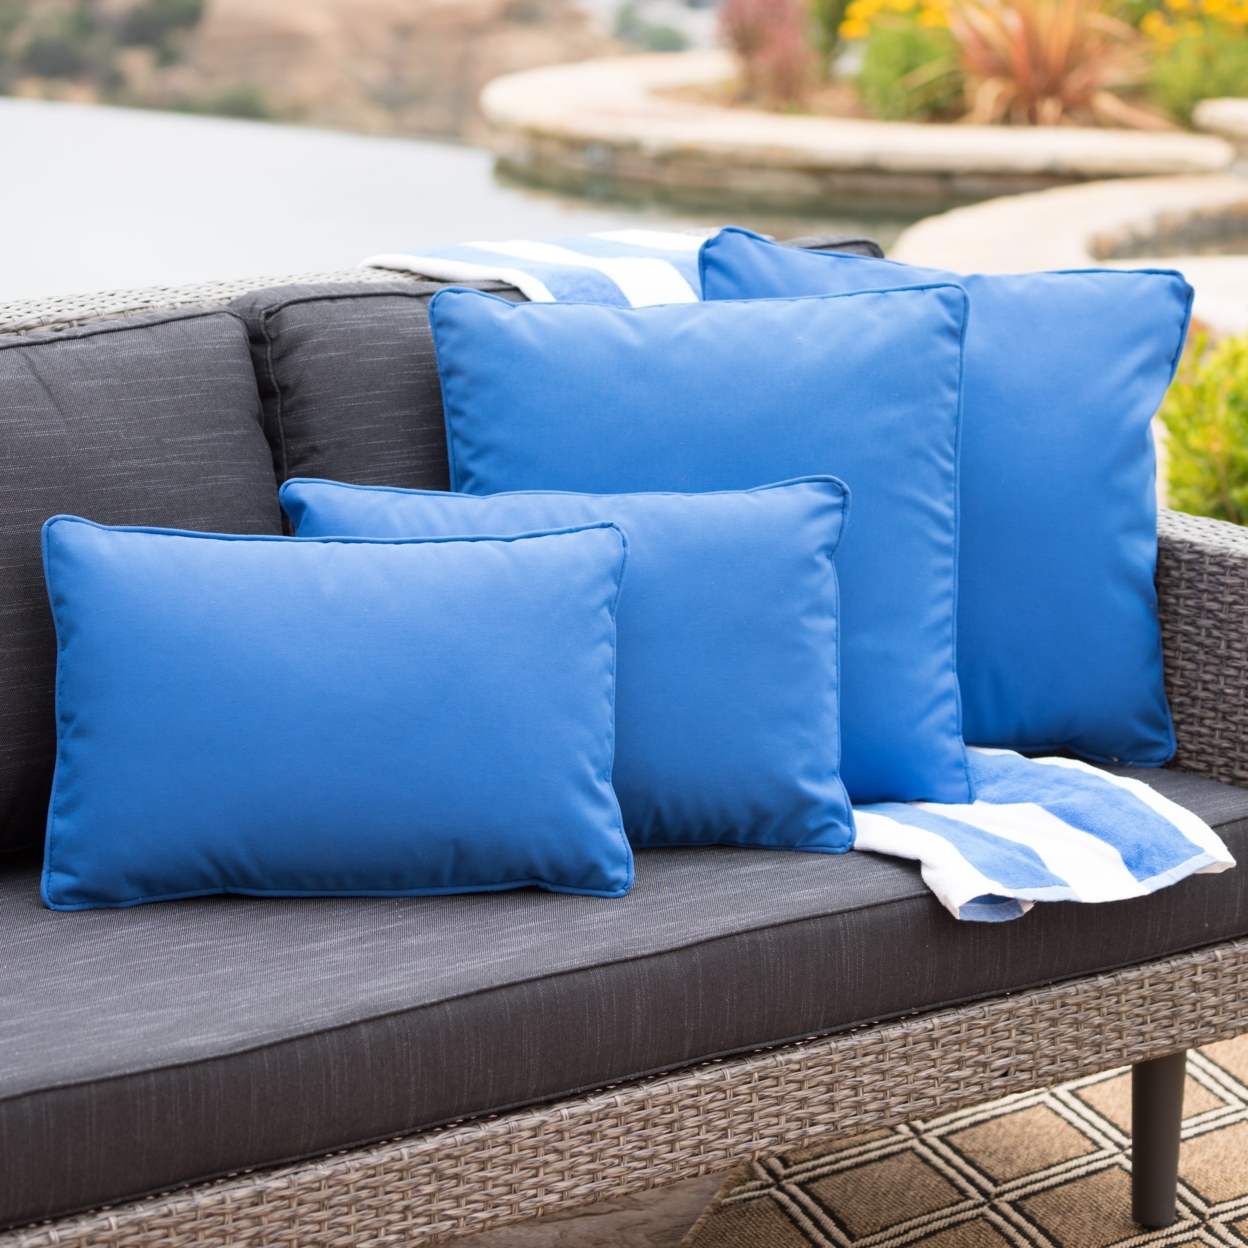 Corona Outdoor Patio Water Resistant Pillow Sets - Blue, Set Of 4